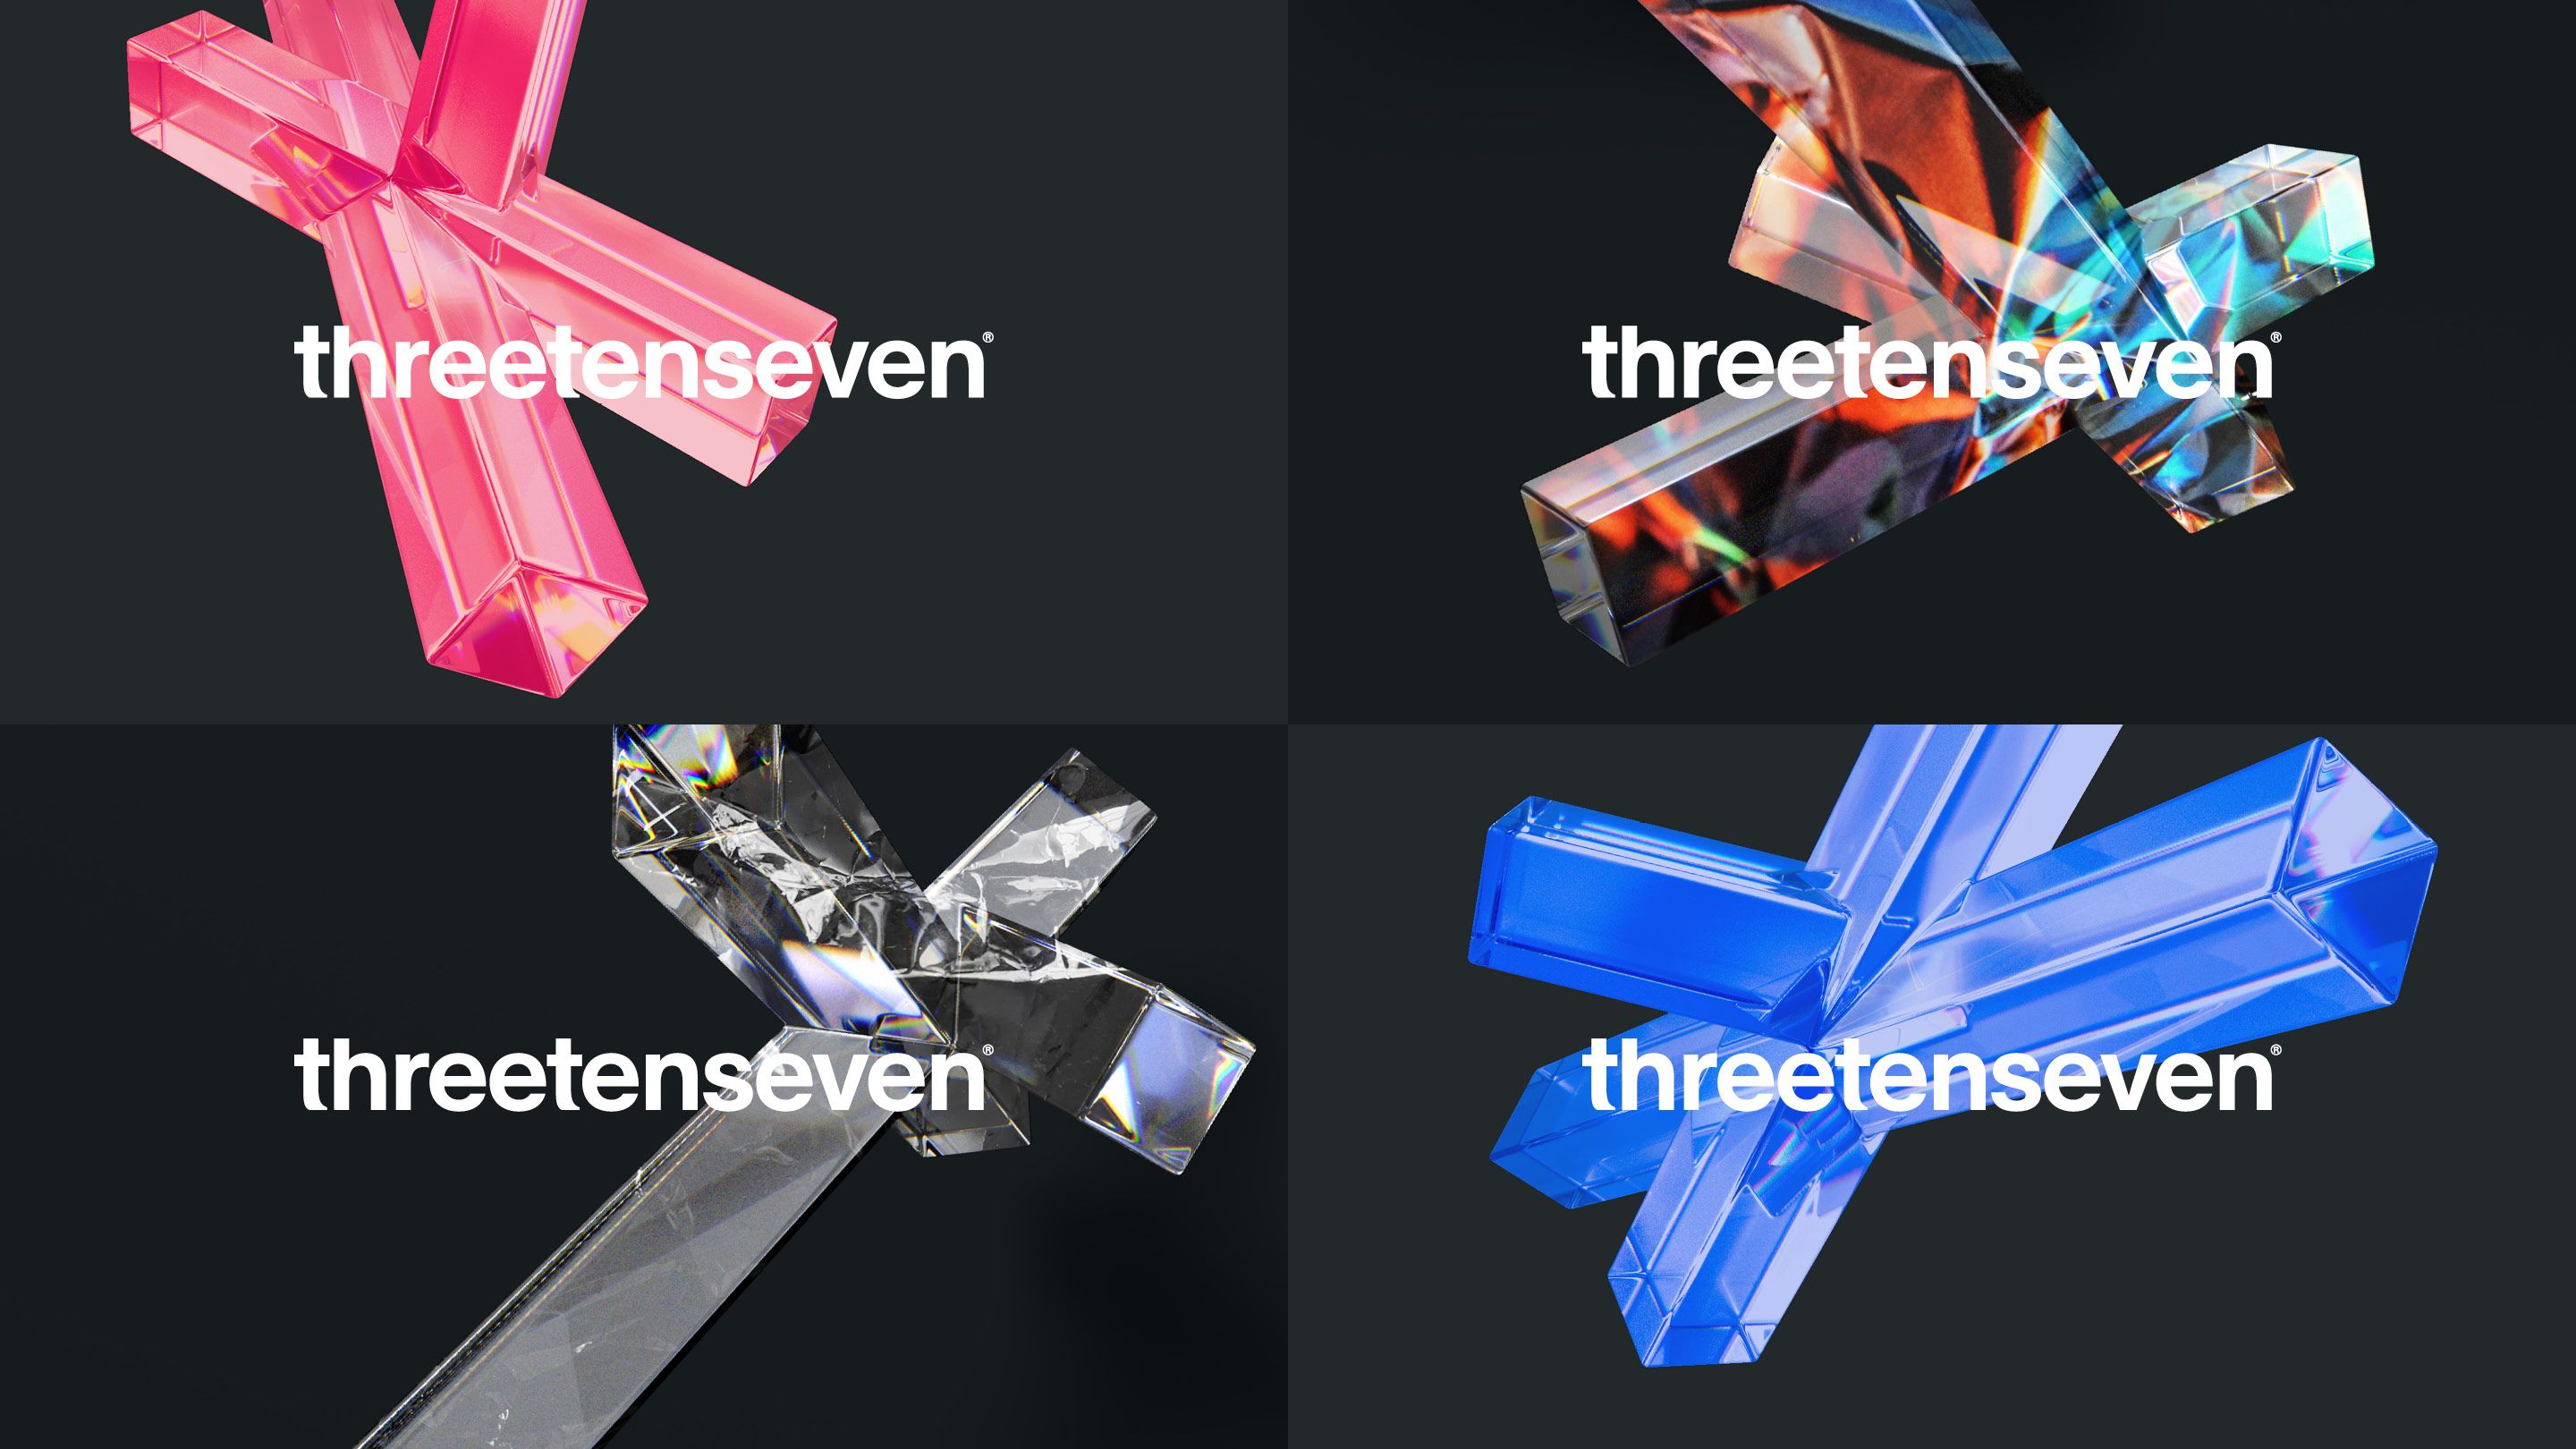 ThreeTenSeven logos over 3D shape filled with colours